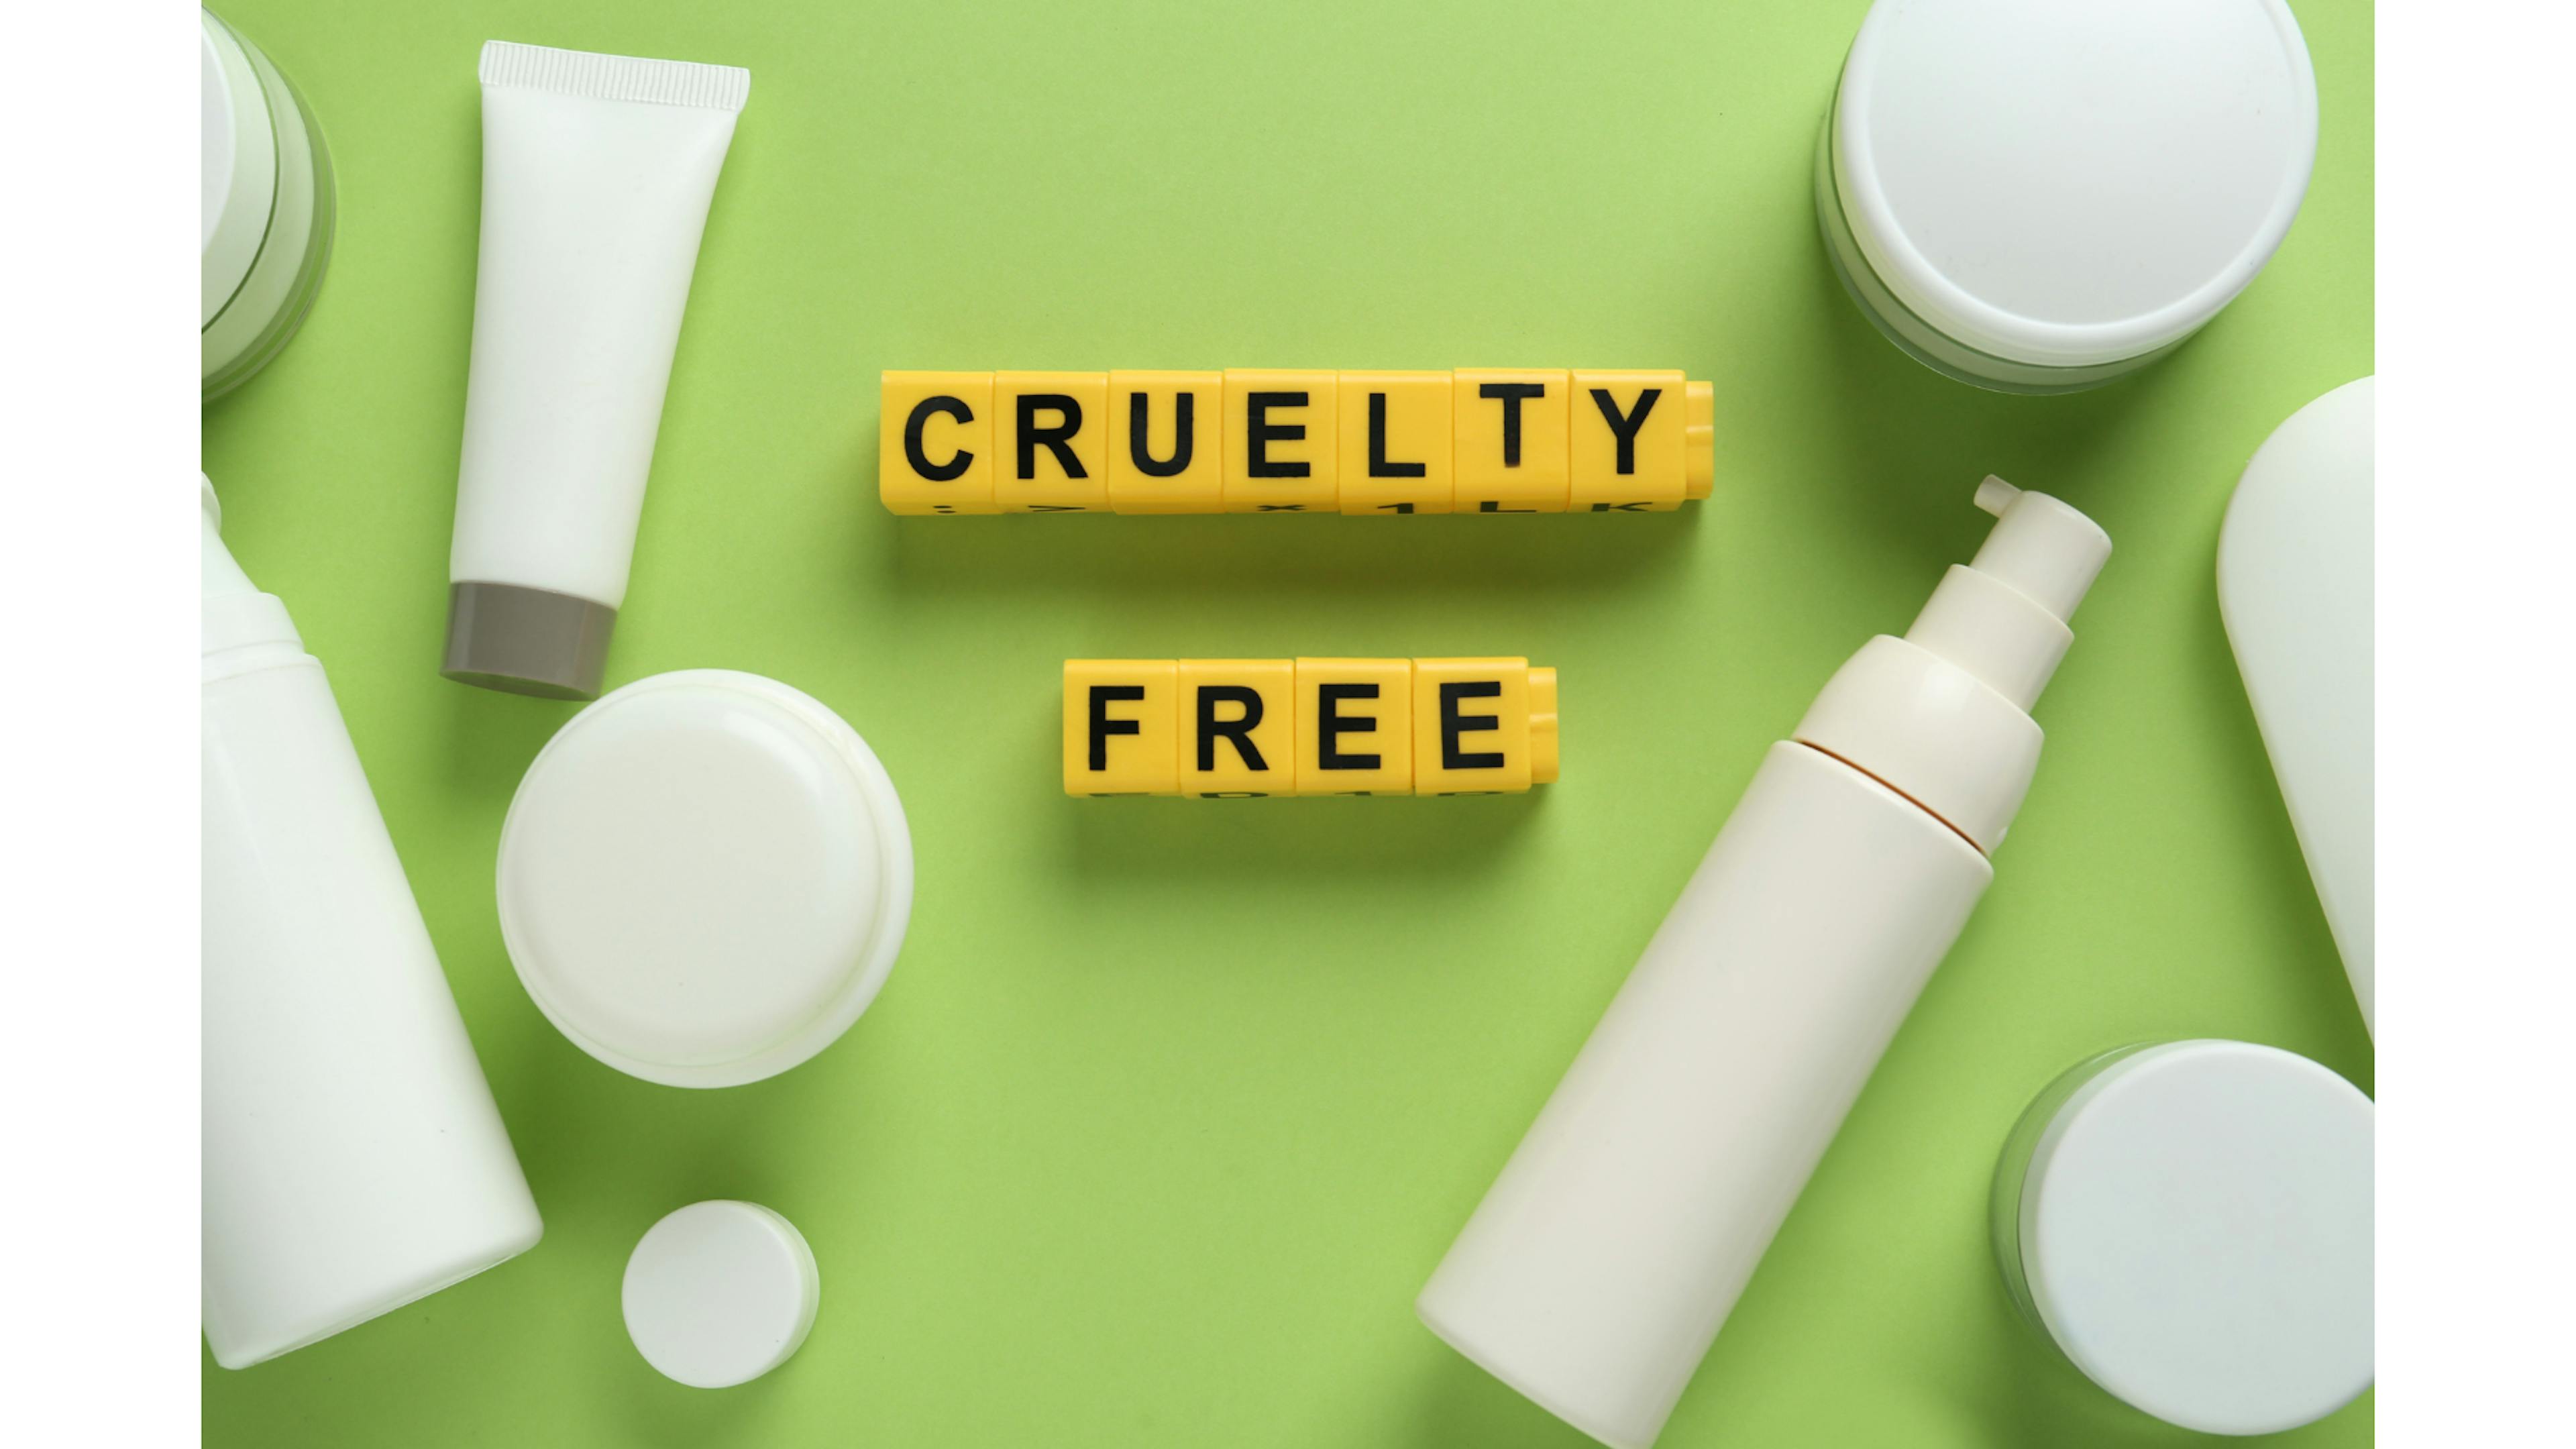 White make-up product bottles on a green background written "cruelty free" on it. 